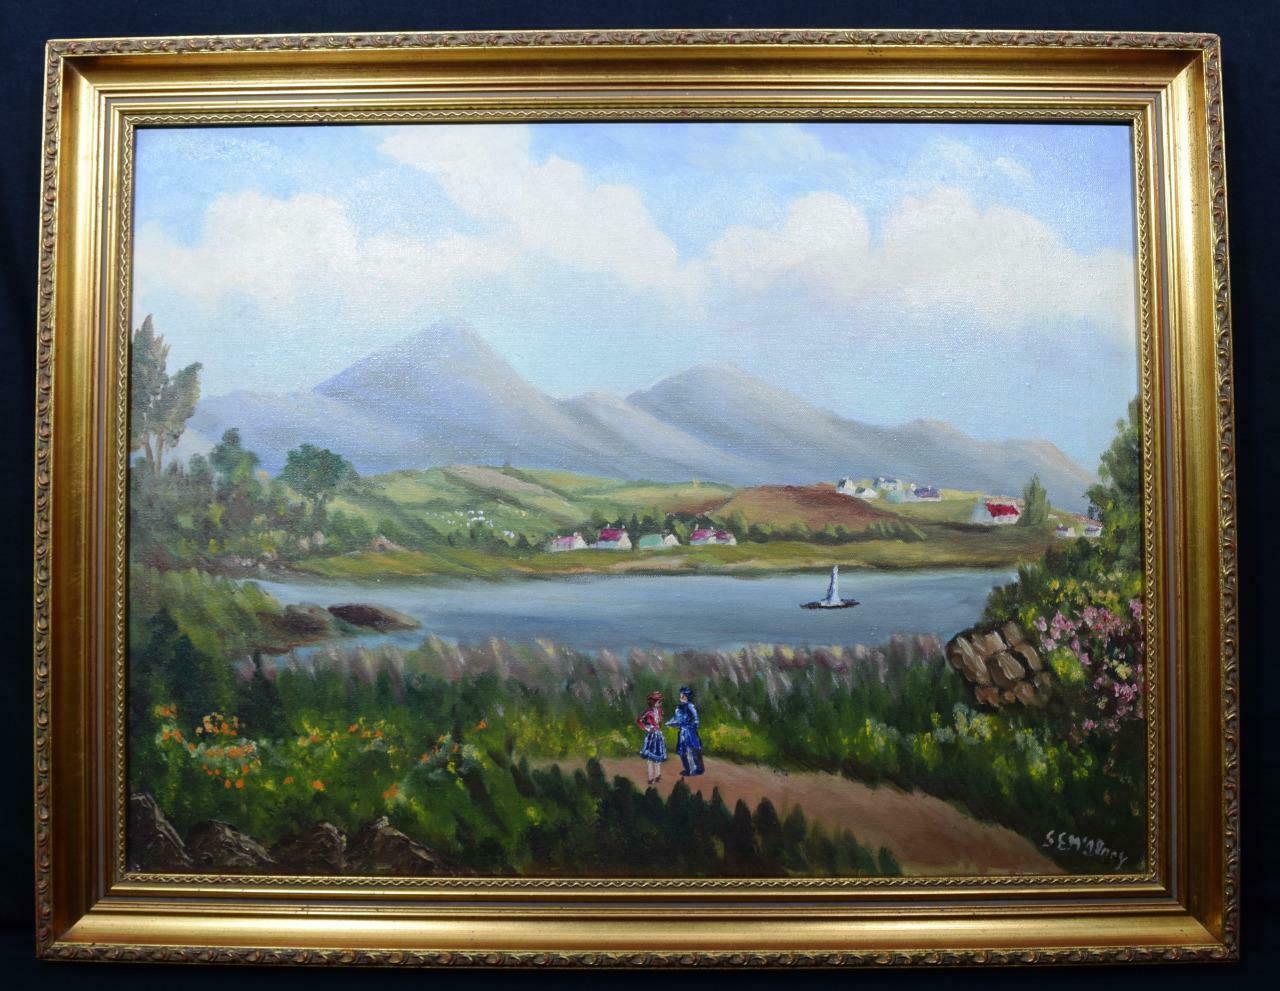 S E McIlroy Landscape Painting - Donegal Mountains Ireland Signed Original Oil Painting